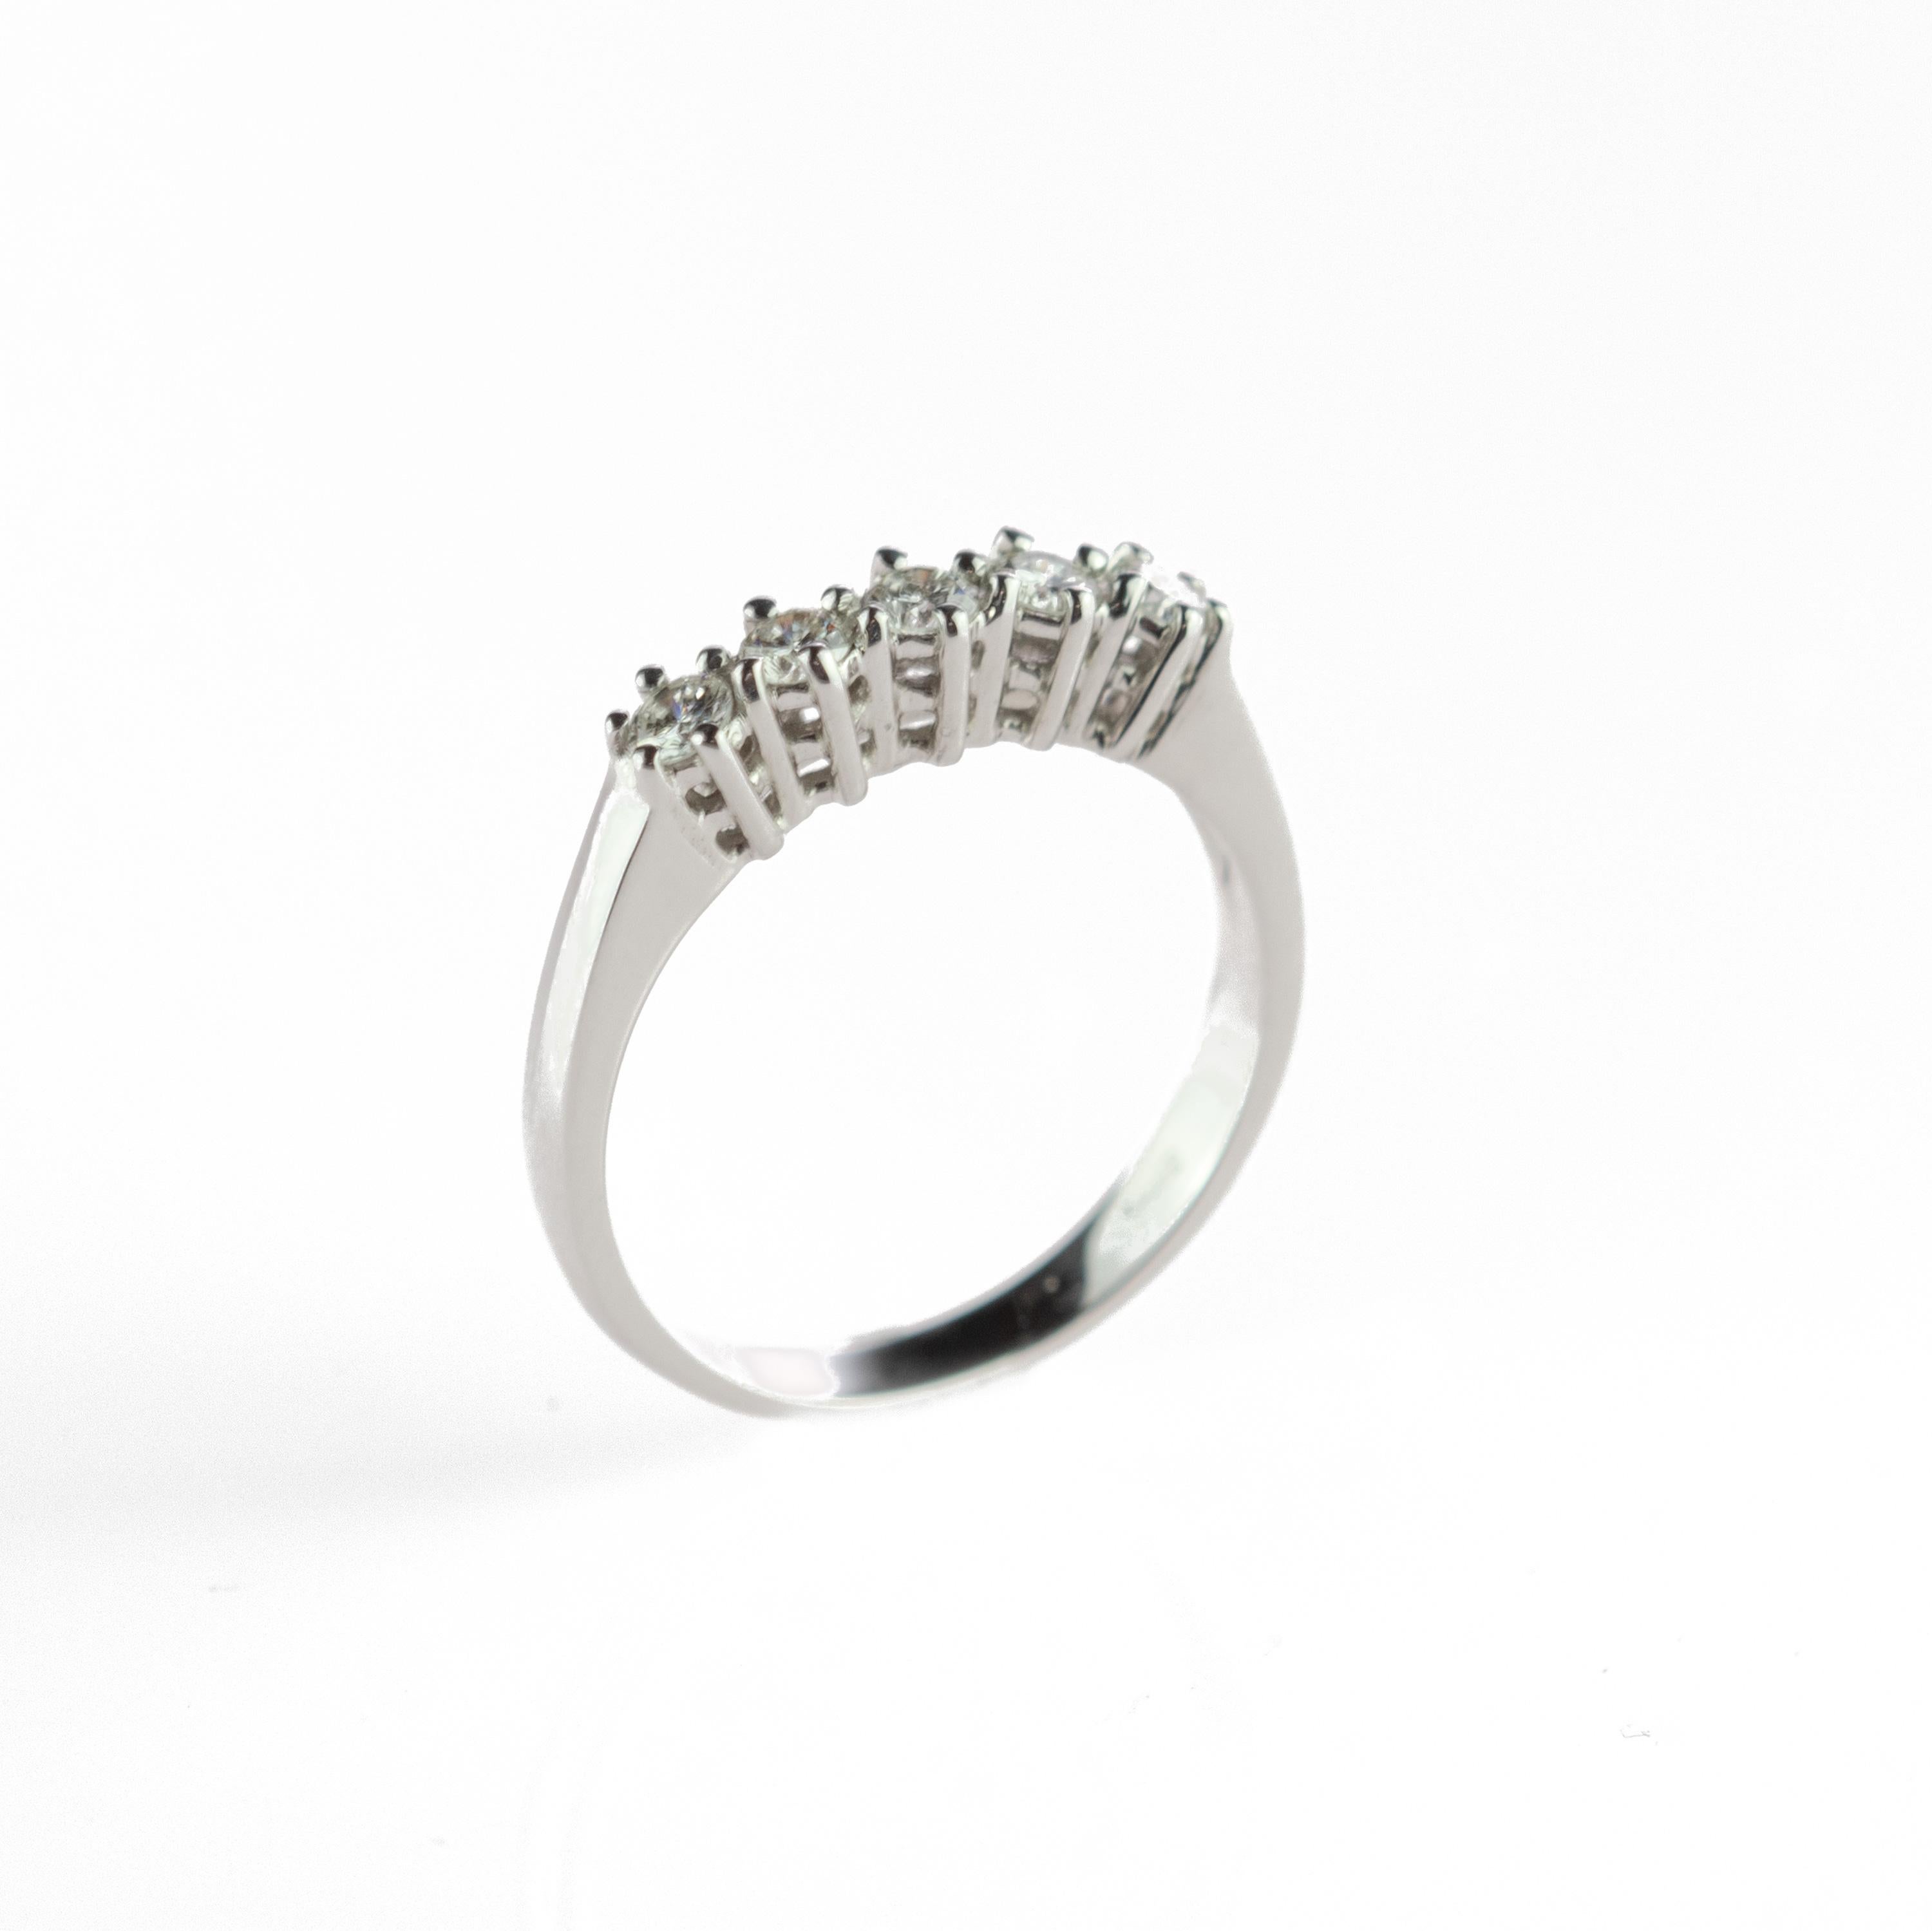 Stunning and marvelous brilliant cut diamond ring embellished by 18 karat carved white gold. Five diamonds for a total of 0.45 carat create a line of gems crafted carefully to be as delicate as the band design. An engagement, bridal or wedding ring